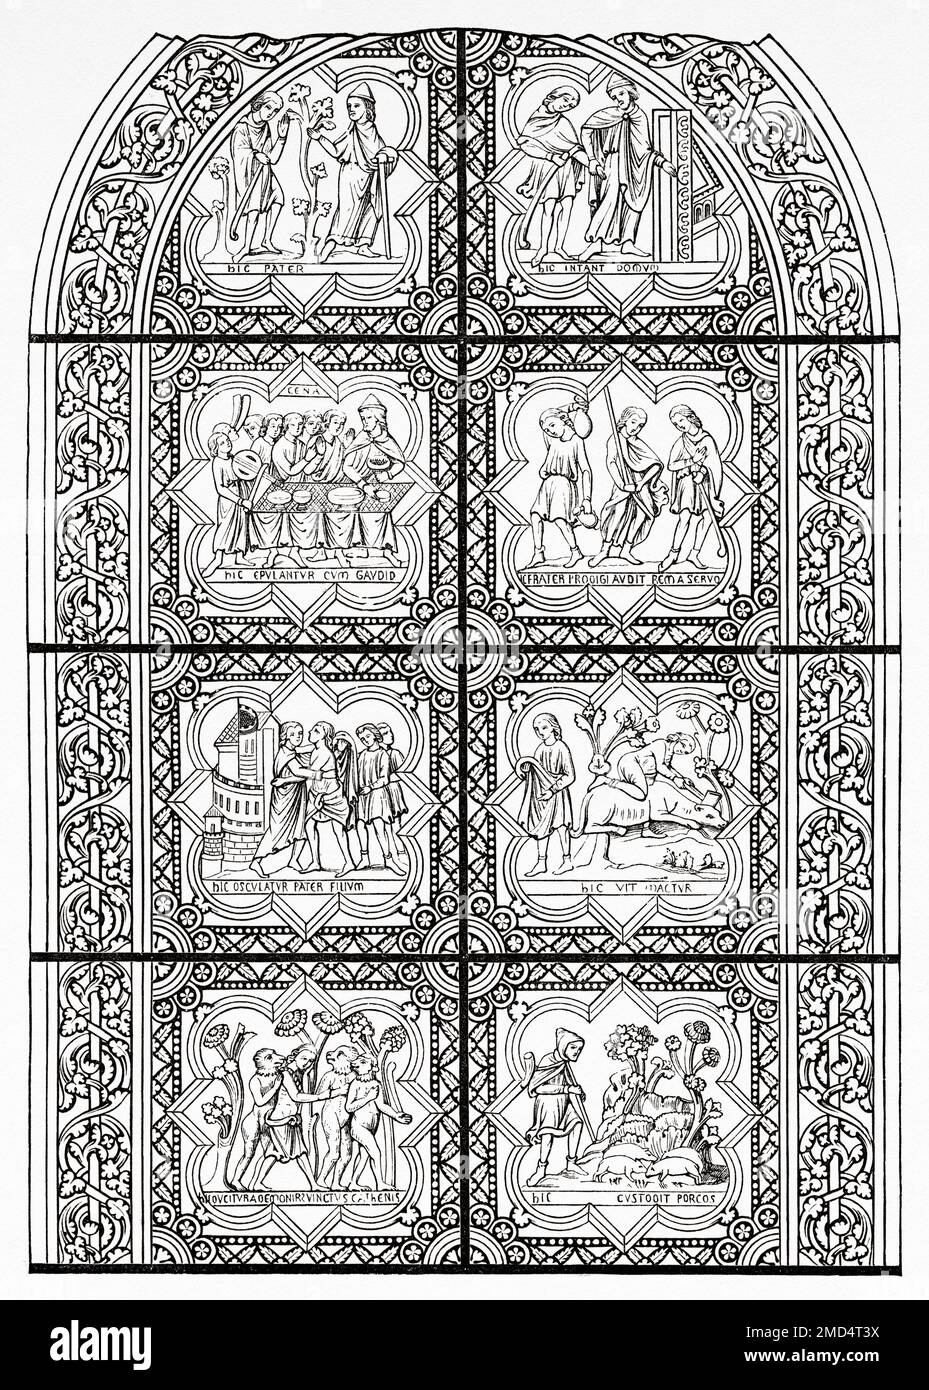 Stained glass window, Sens Cathedral, 13th century, France. The Arts of the Middle Ages and at the Period of the Renaissance by Paul Lacroix, 1874 Stock Photo